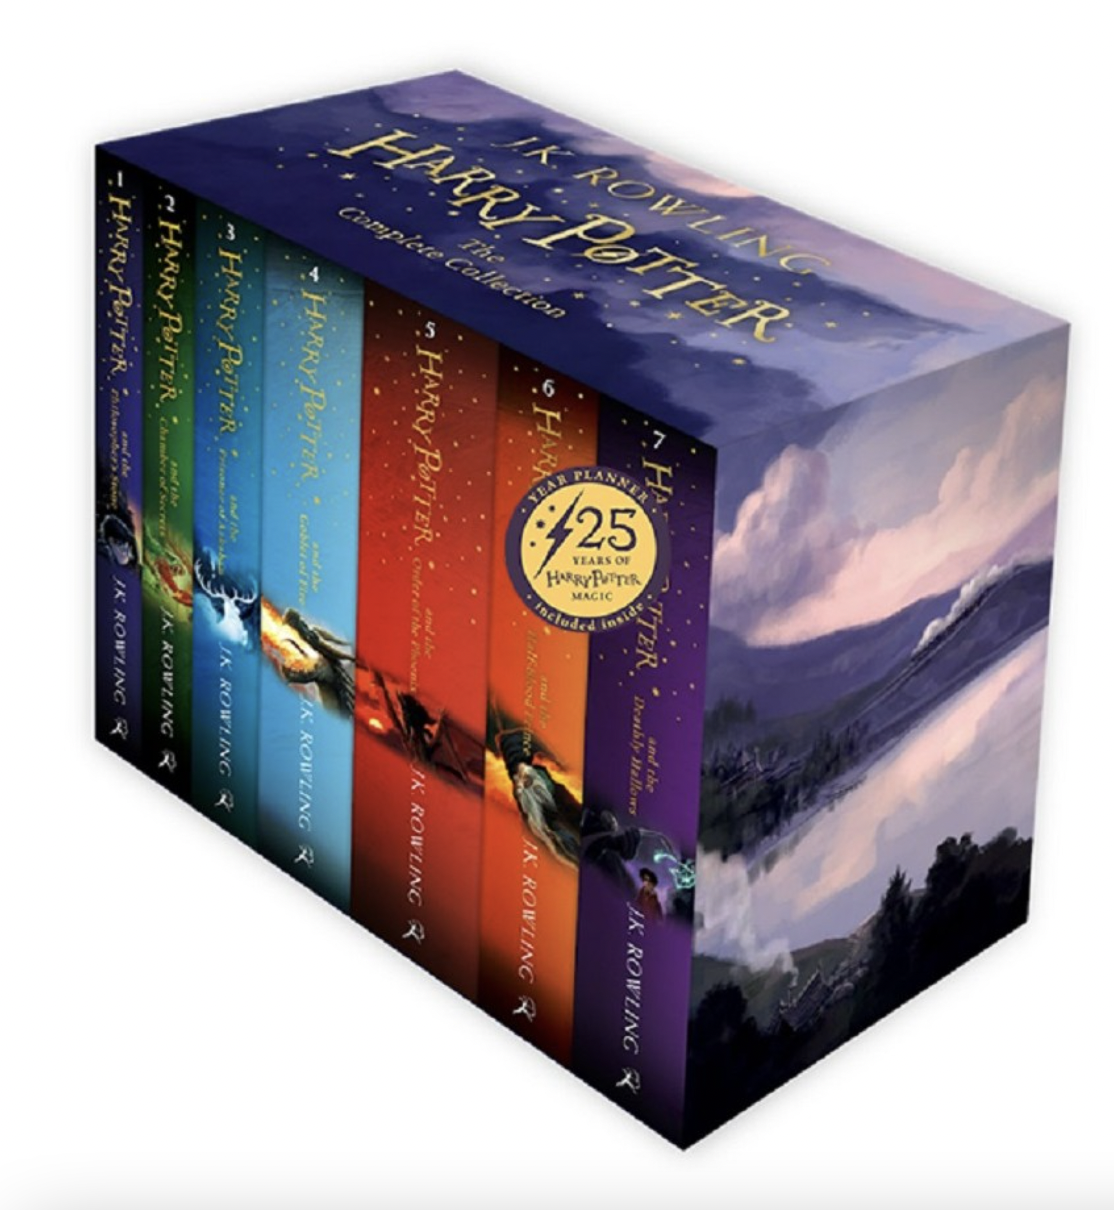 Harry Potter: The Complete Collection (Paperback) by J K Rowling